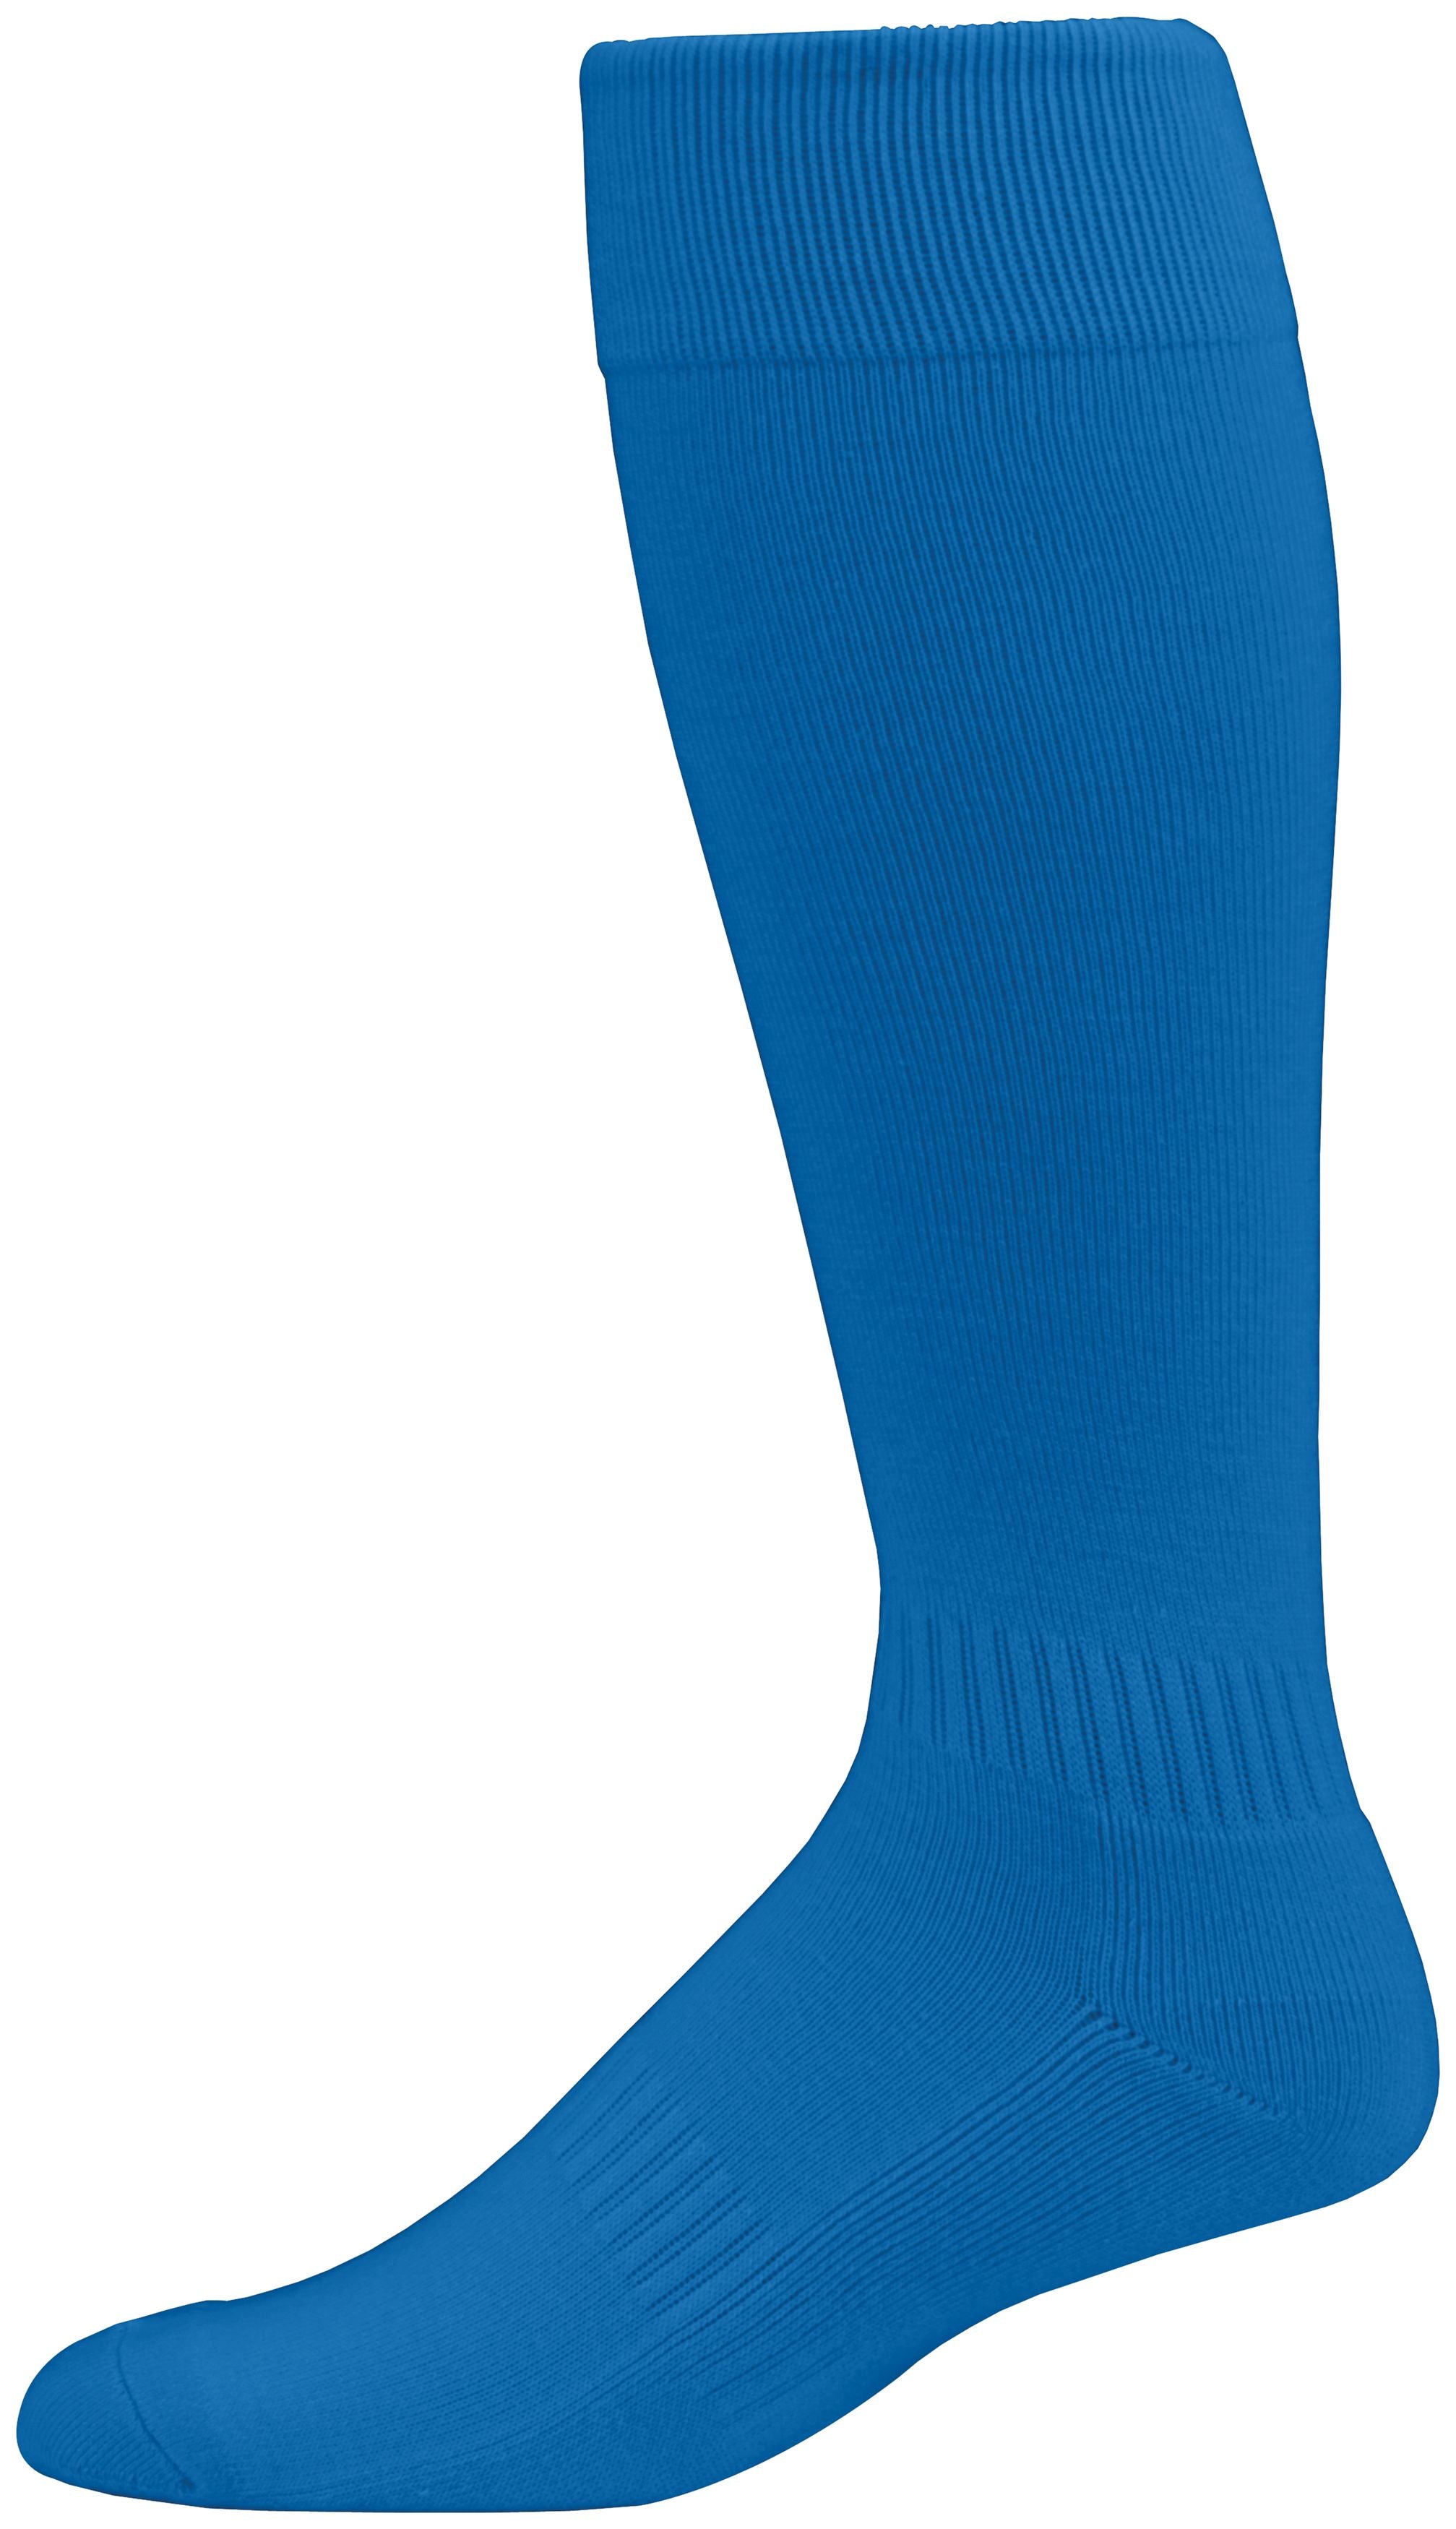 Augusta Sportswear Elite Multi-Sport Sock in Royal  -Part of the Accessories, Augusta-Products, Accessories-Socks product lines at KanaleyCreations.com